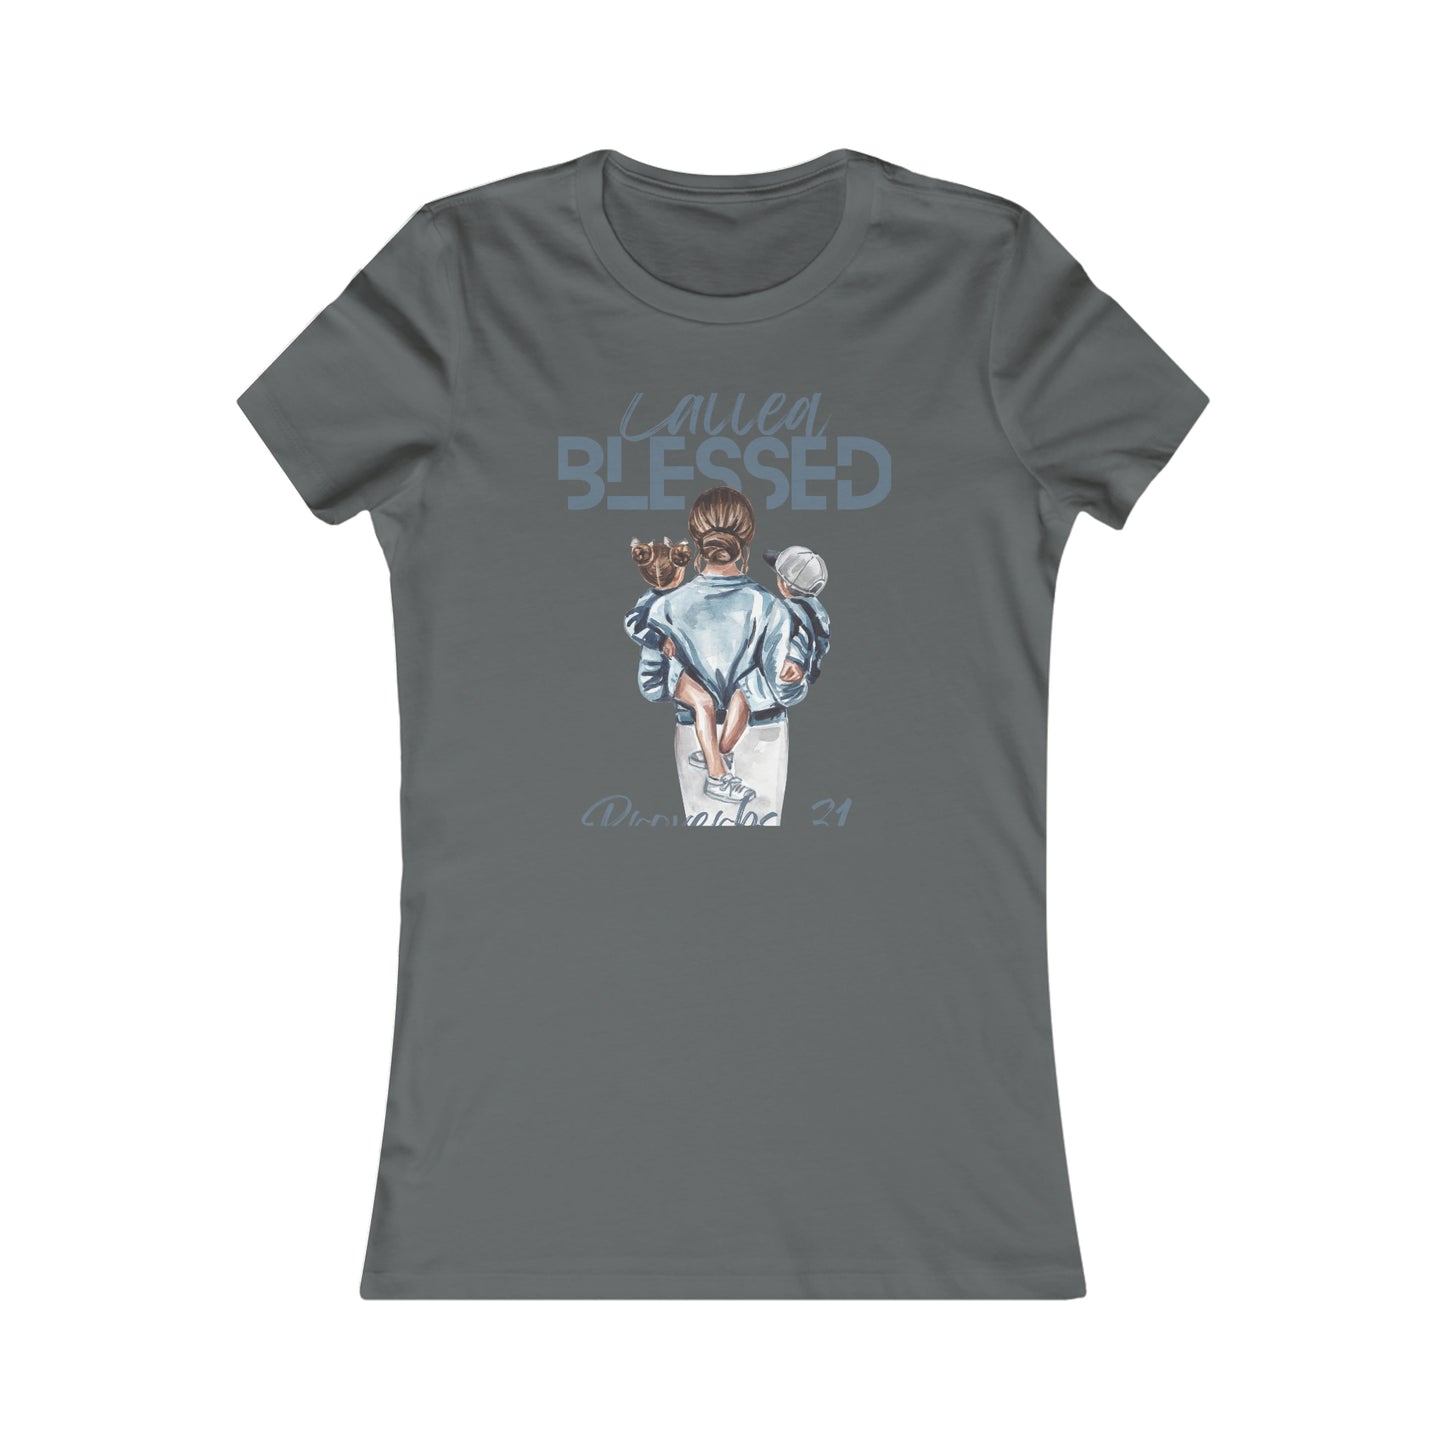 CALLED BLESSED Tee